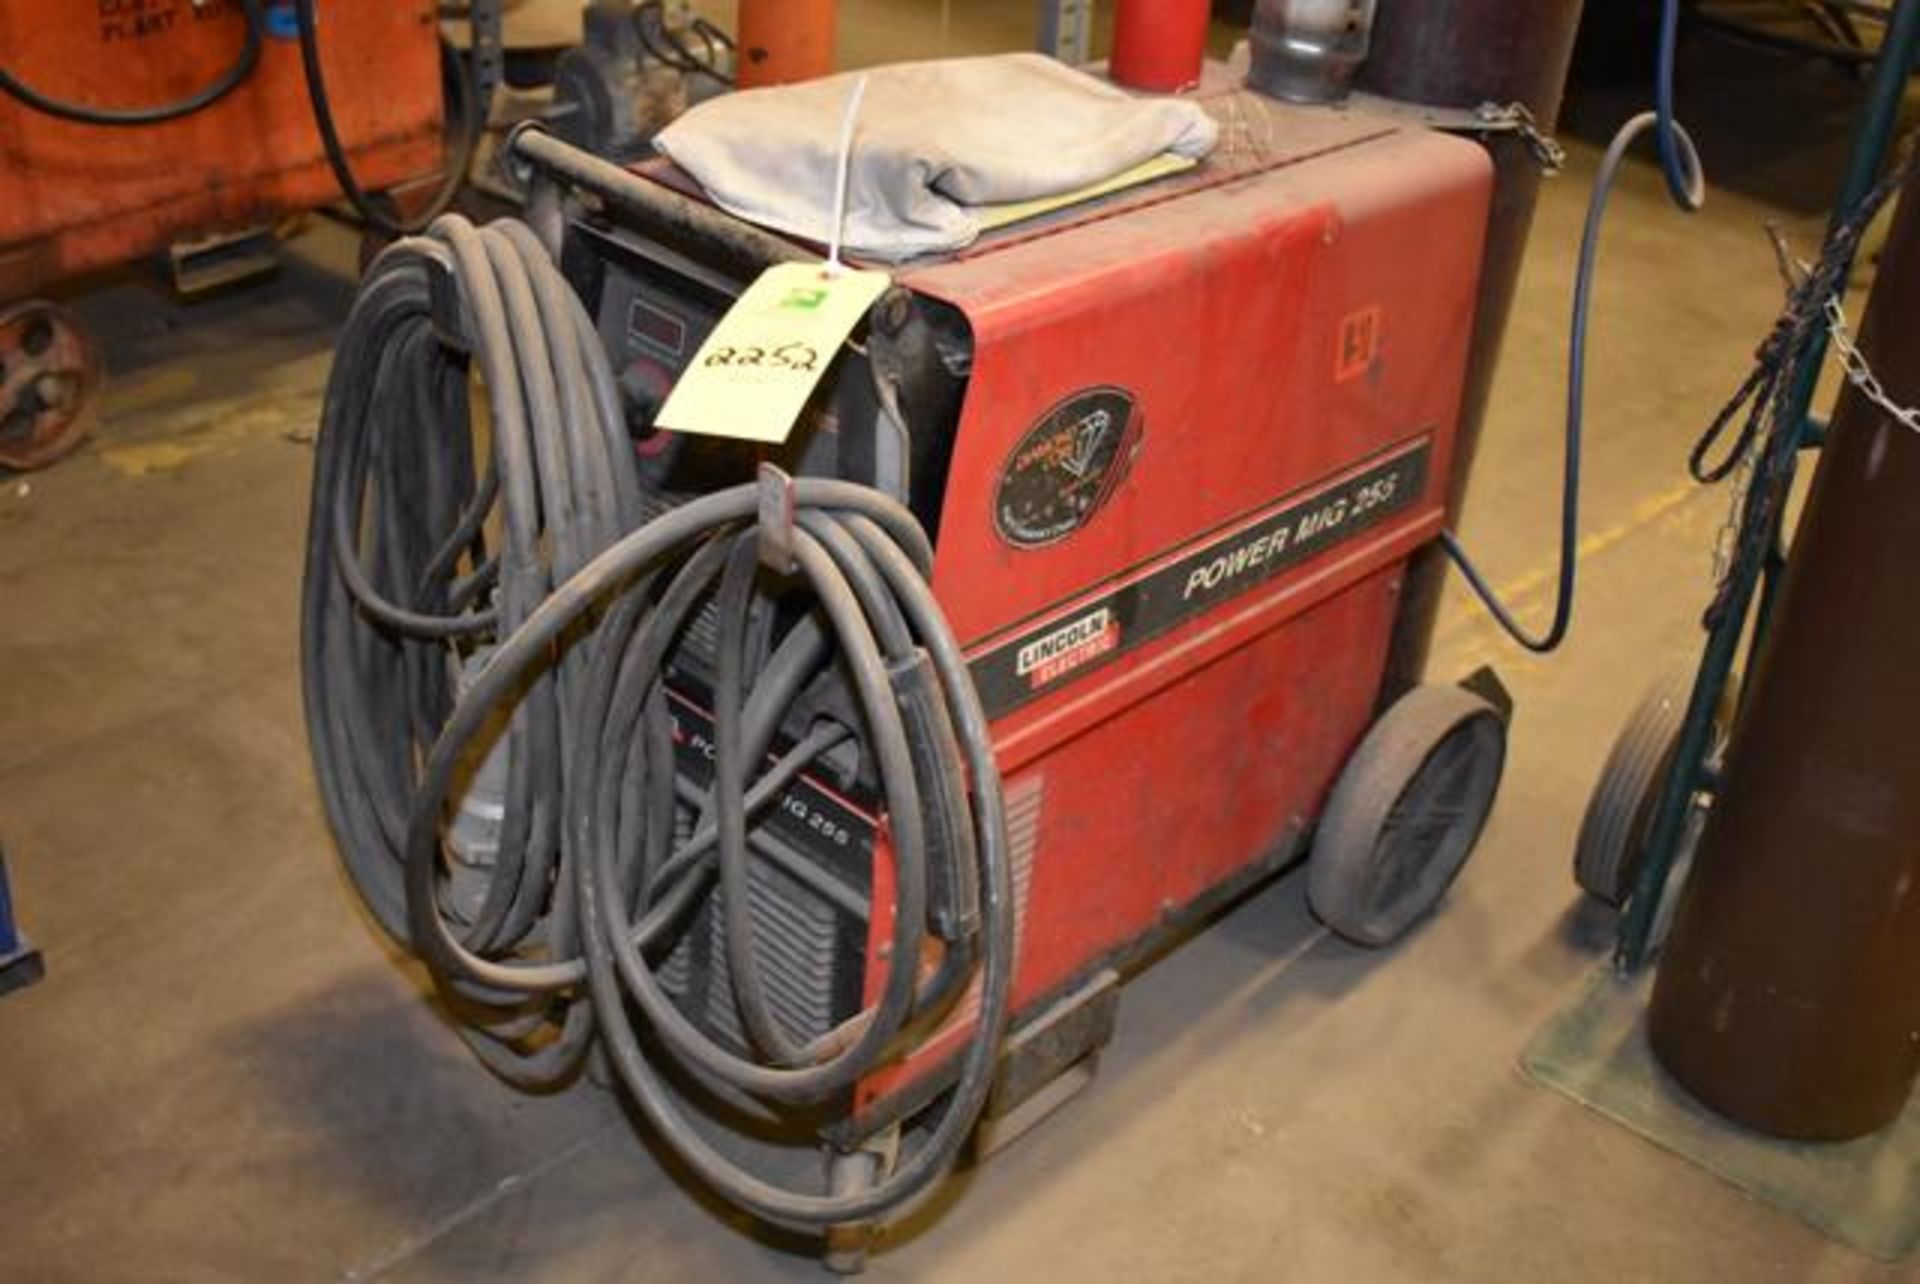 Lincoln Power MIG 255 Welder, 4-Wheel Base, Does Not Include Tank, RIGGING FEE: $55